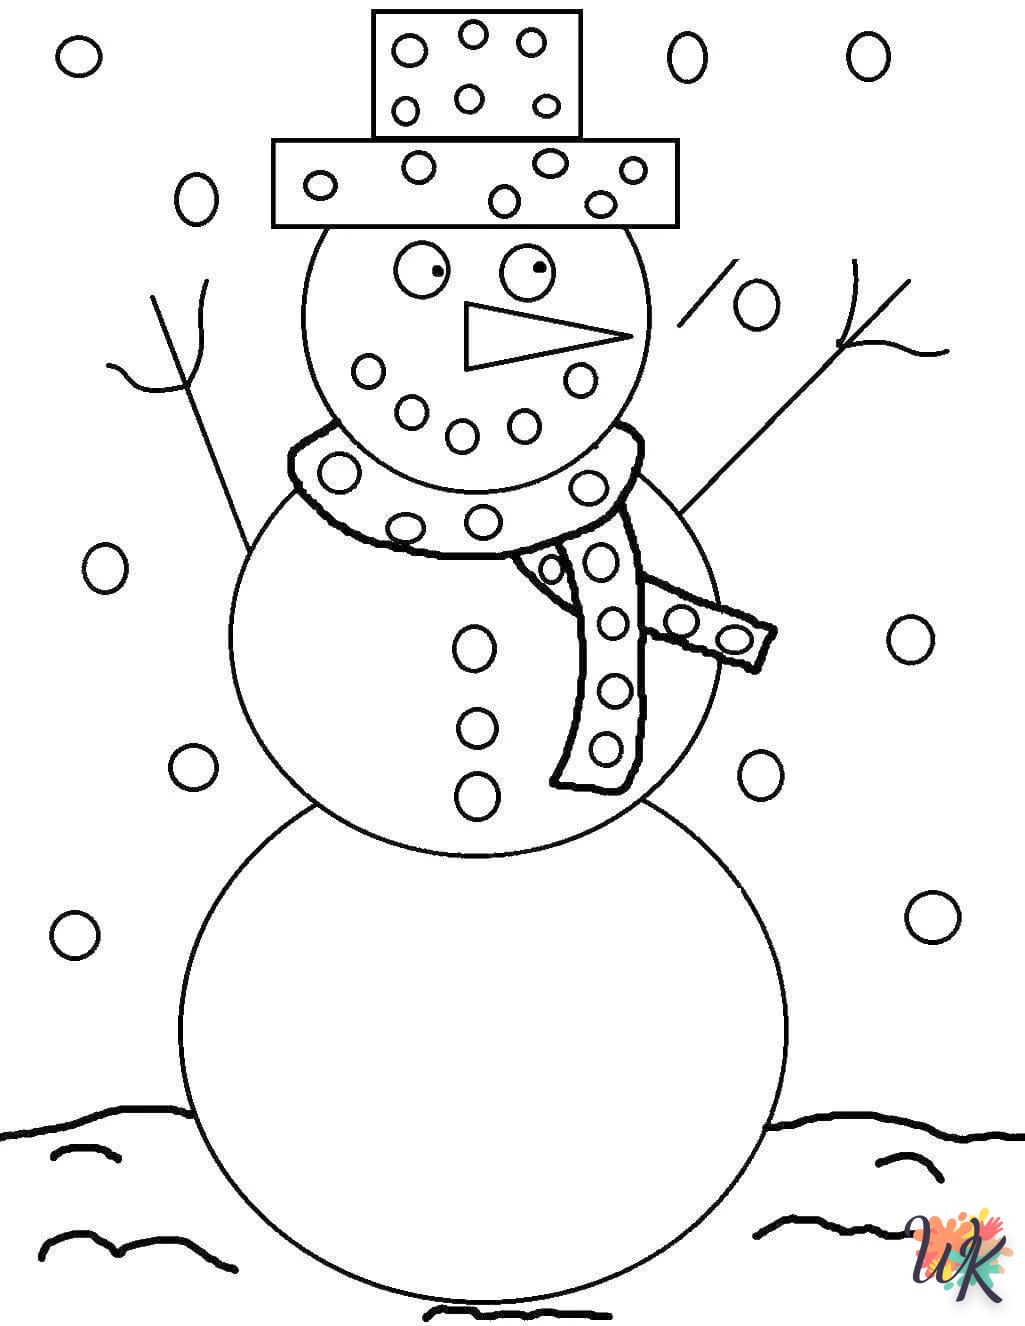 Snowman coloring page to color online